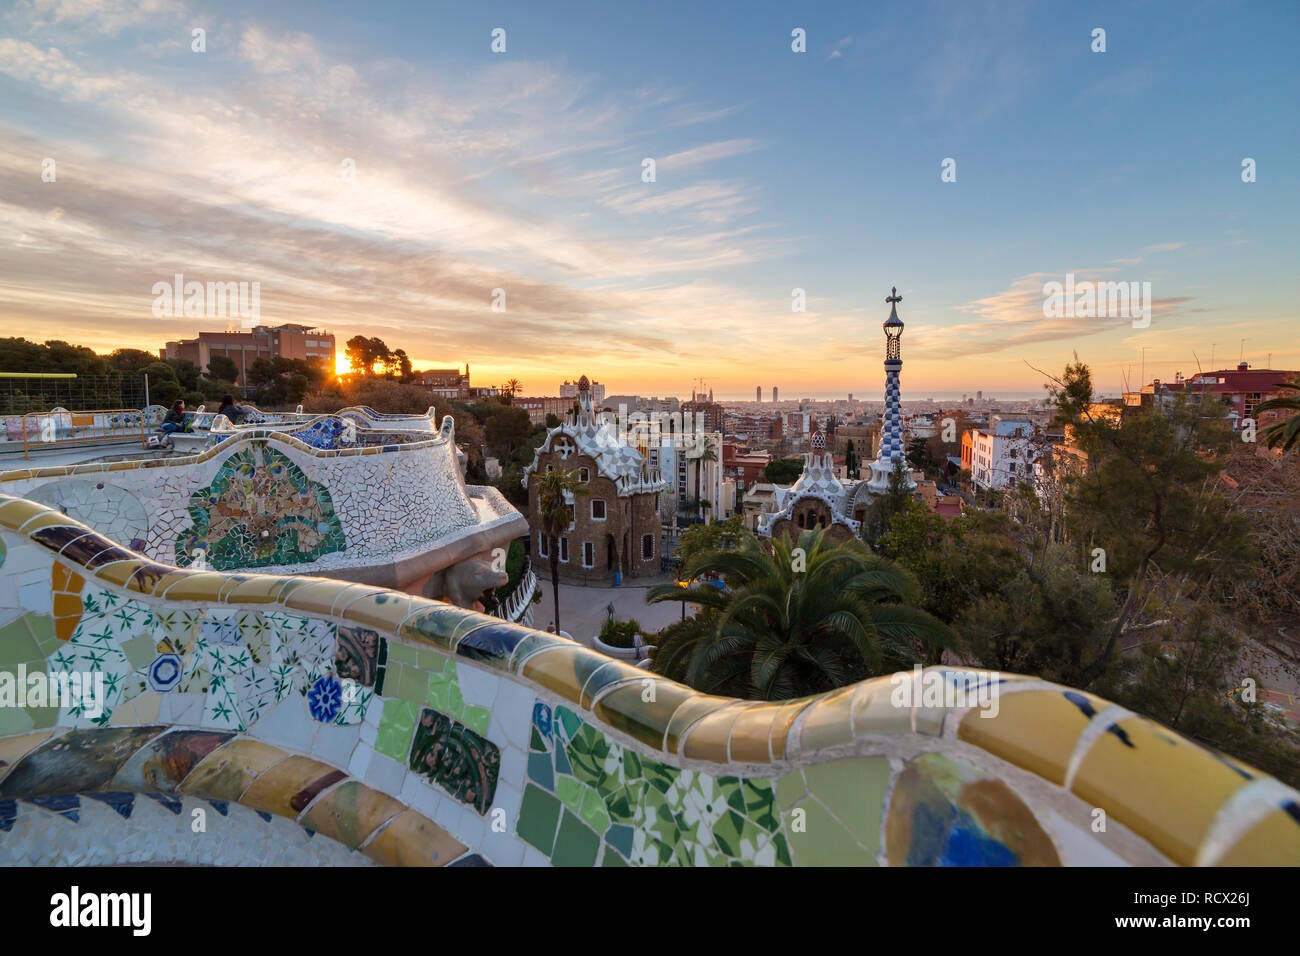 Sunrise view of the Park Guell in Barcelona, Spain. Stock Photo